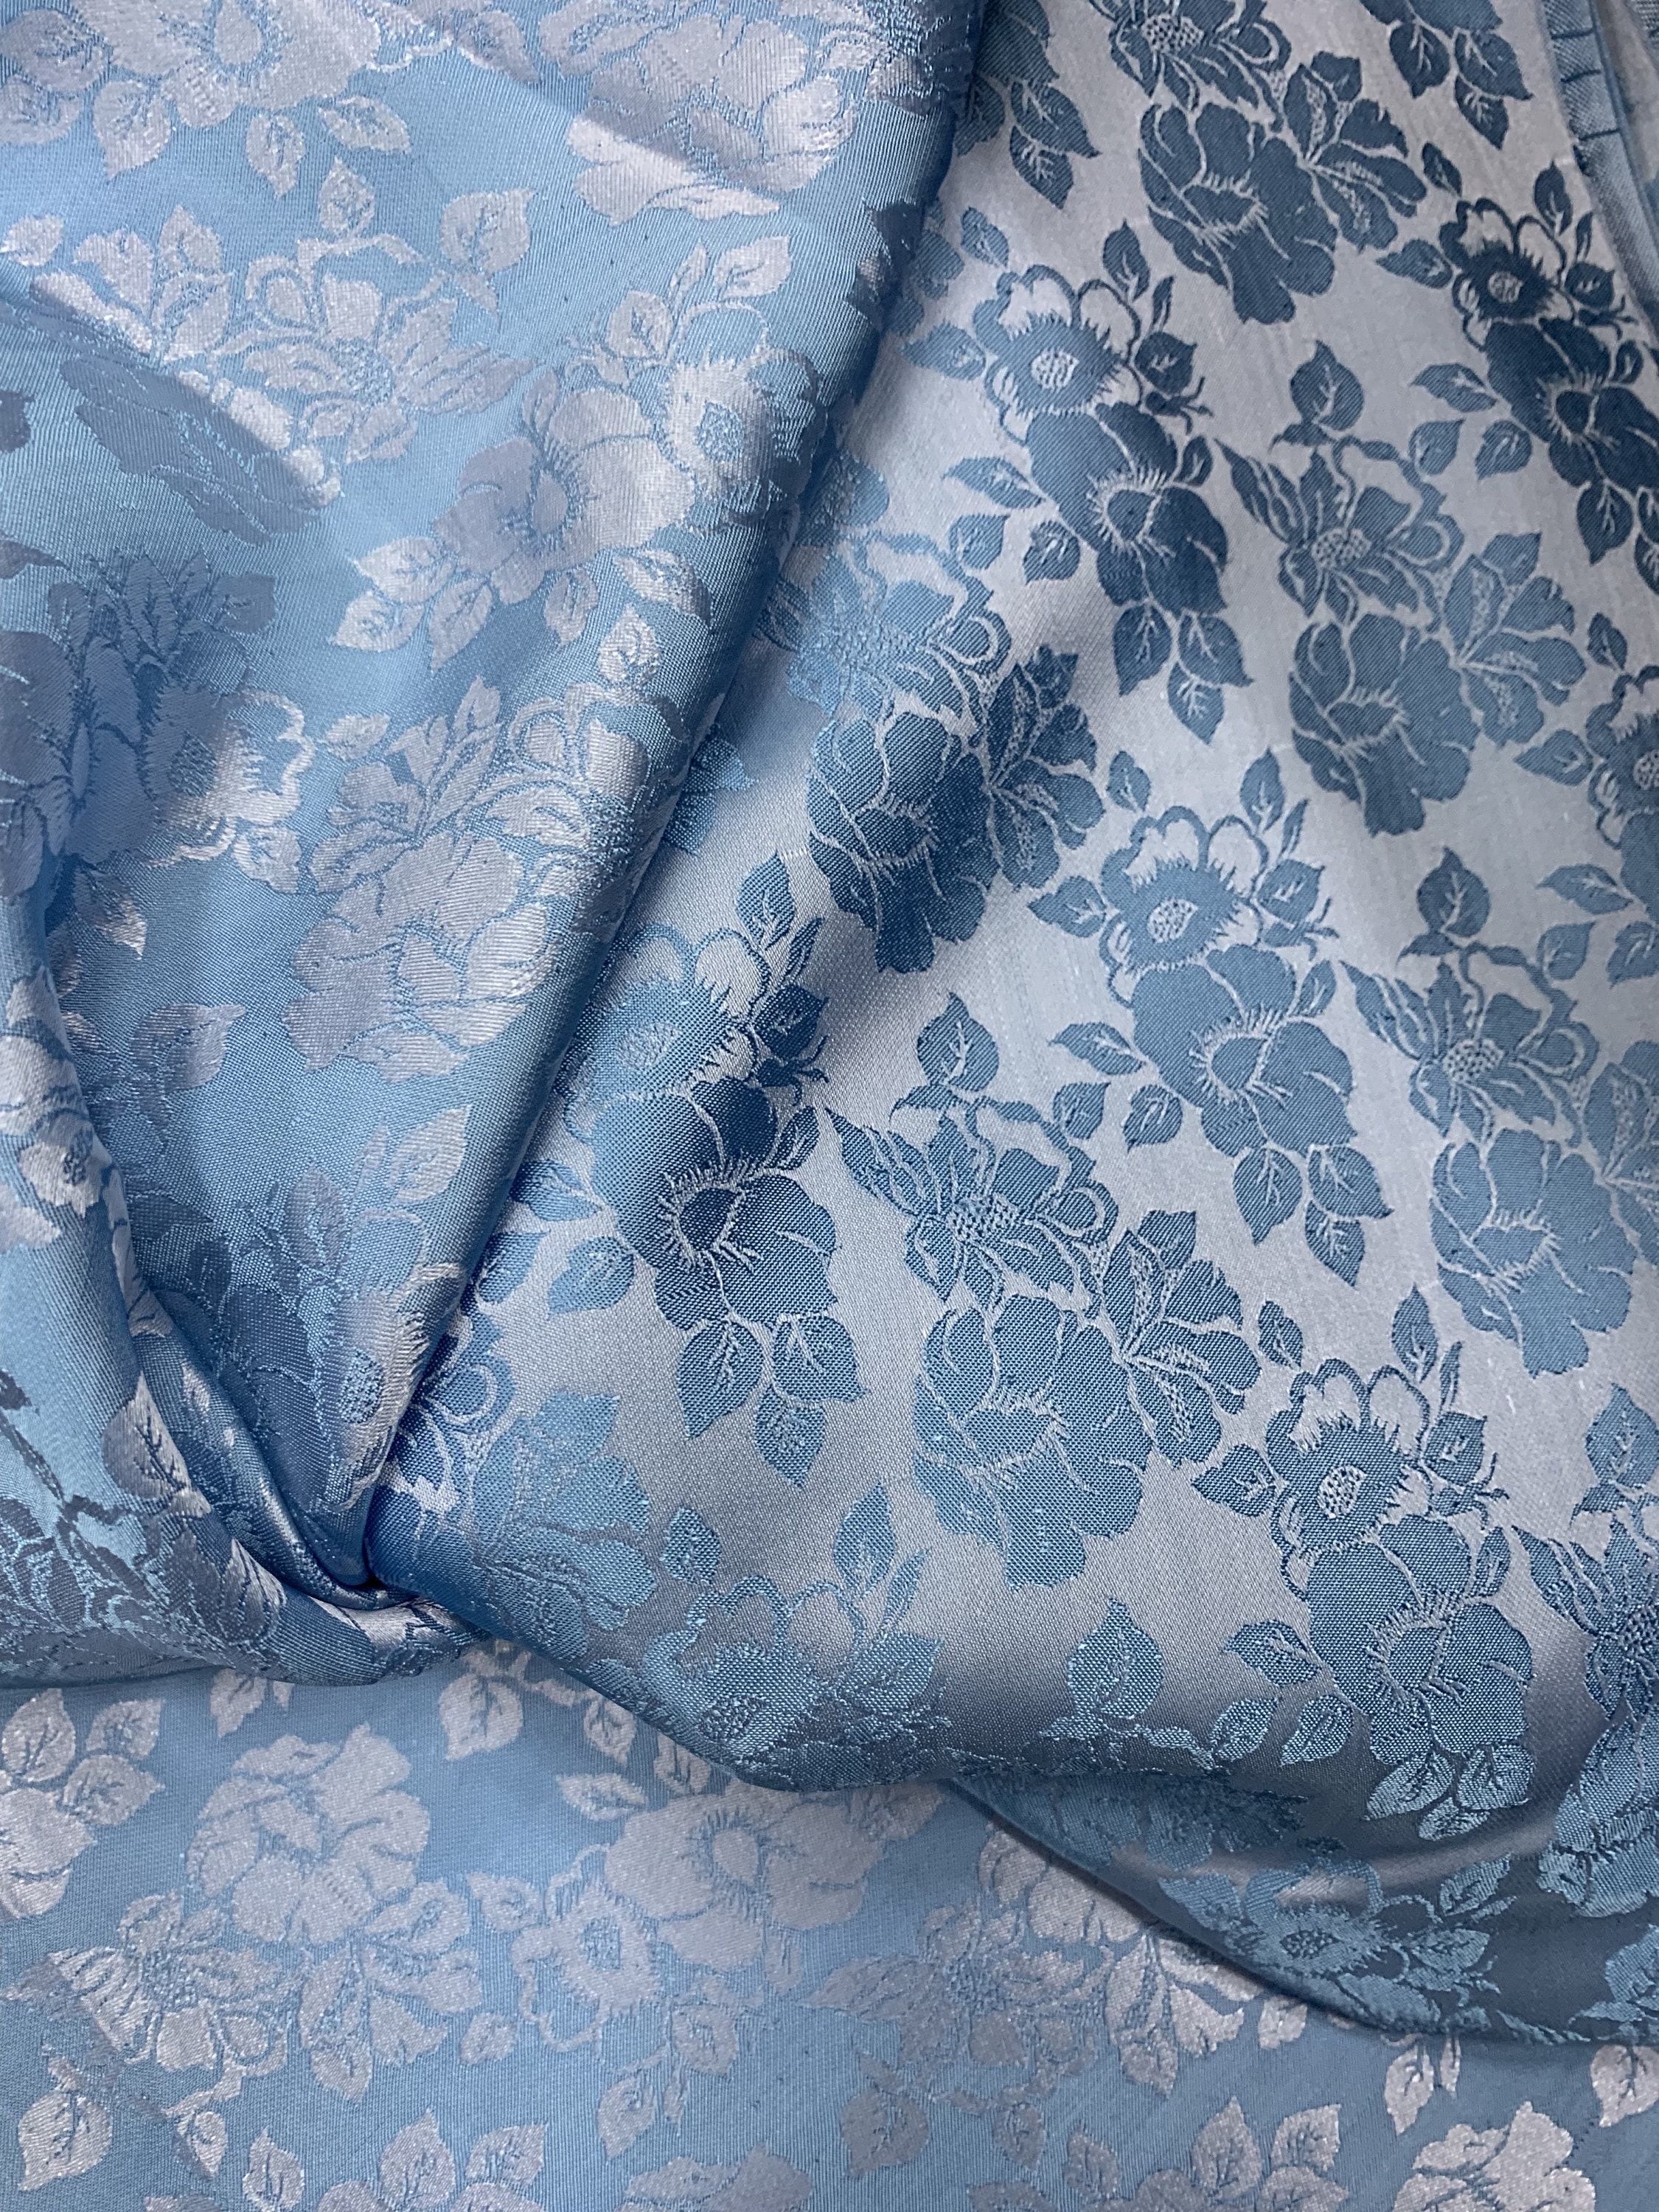 Baby Blue Silk PURE MULBERRY SILK Fabric by the Yard | Etsy